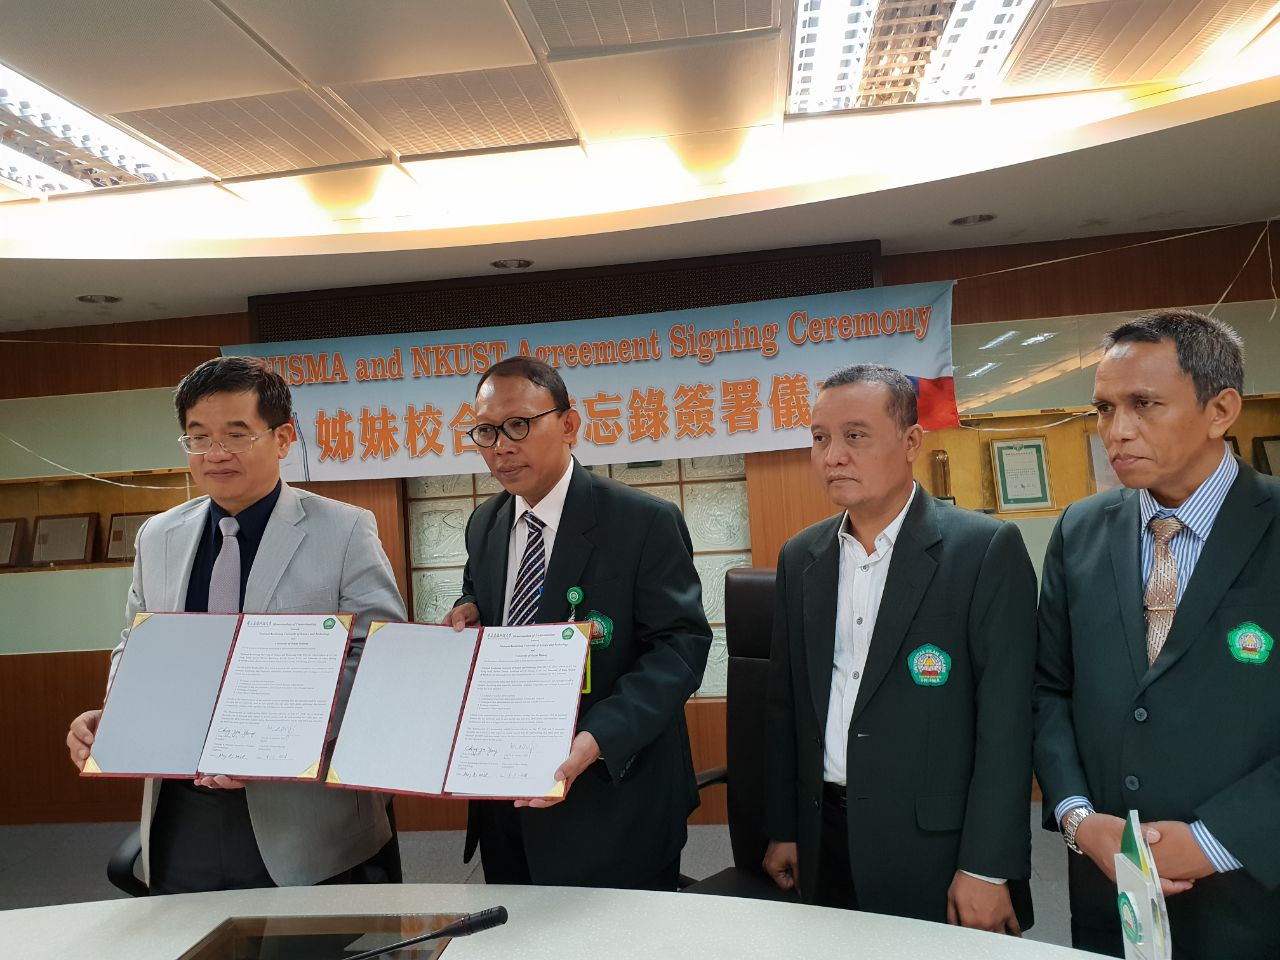 National Kaohsiung University of Science and Technology, Taiwan and UNISMA Malang, Indonesia: Agreement Signing Ceremony